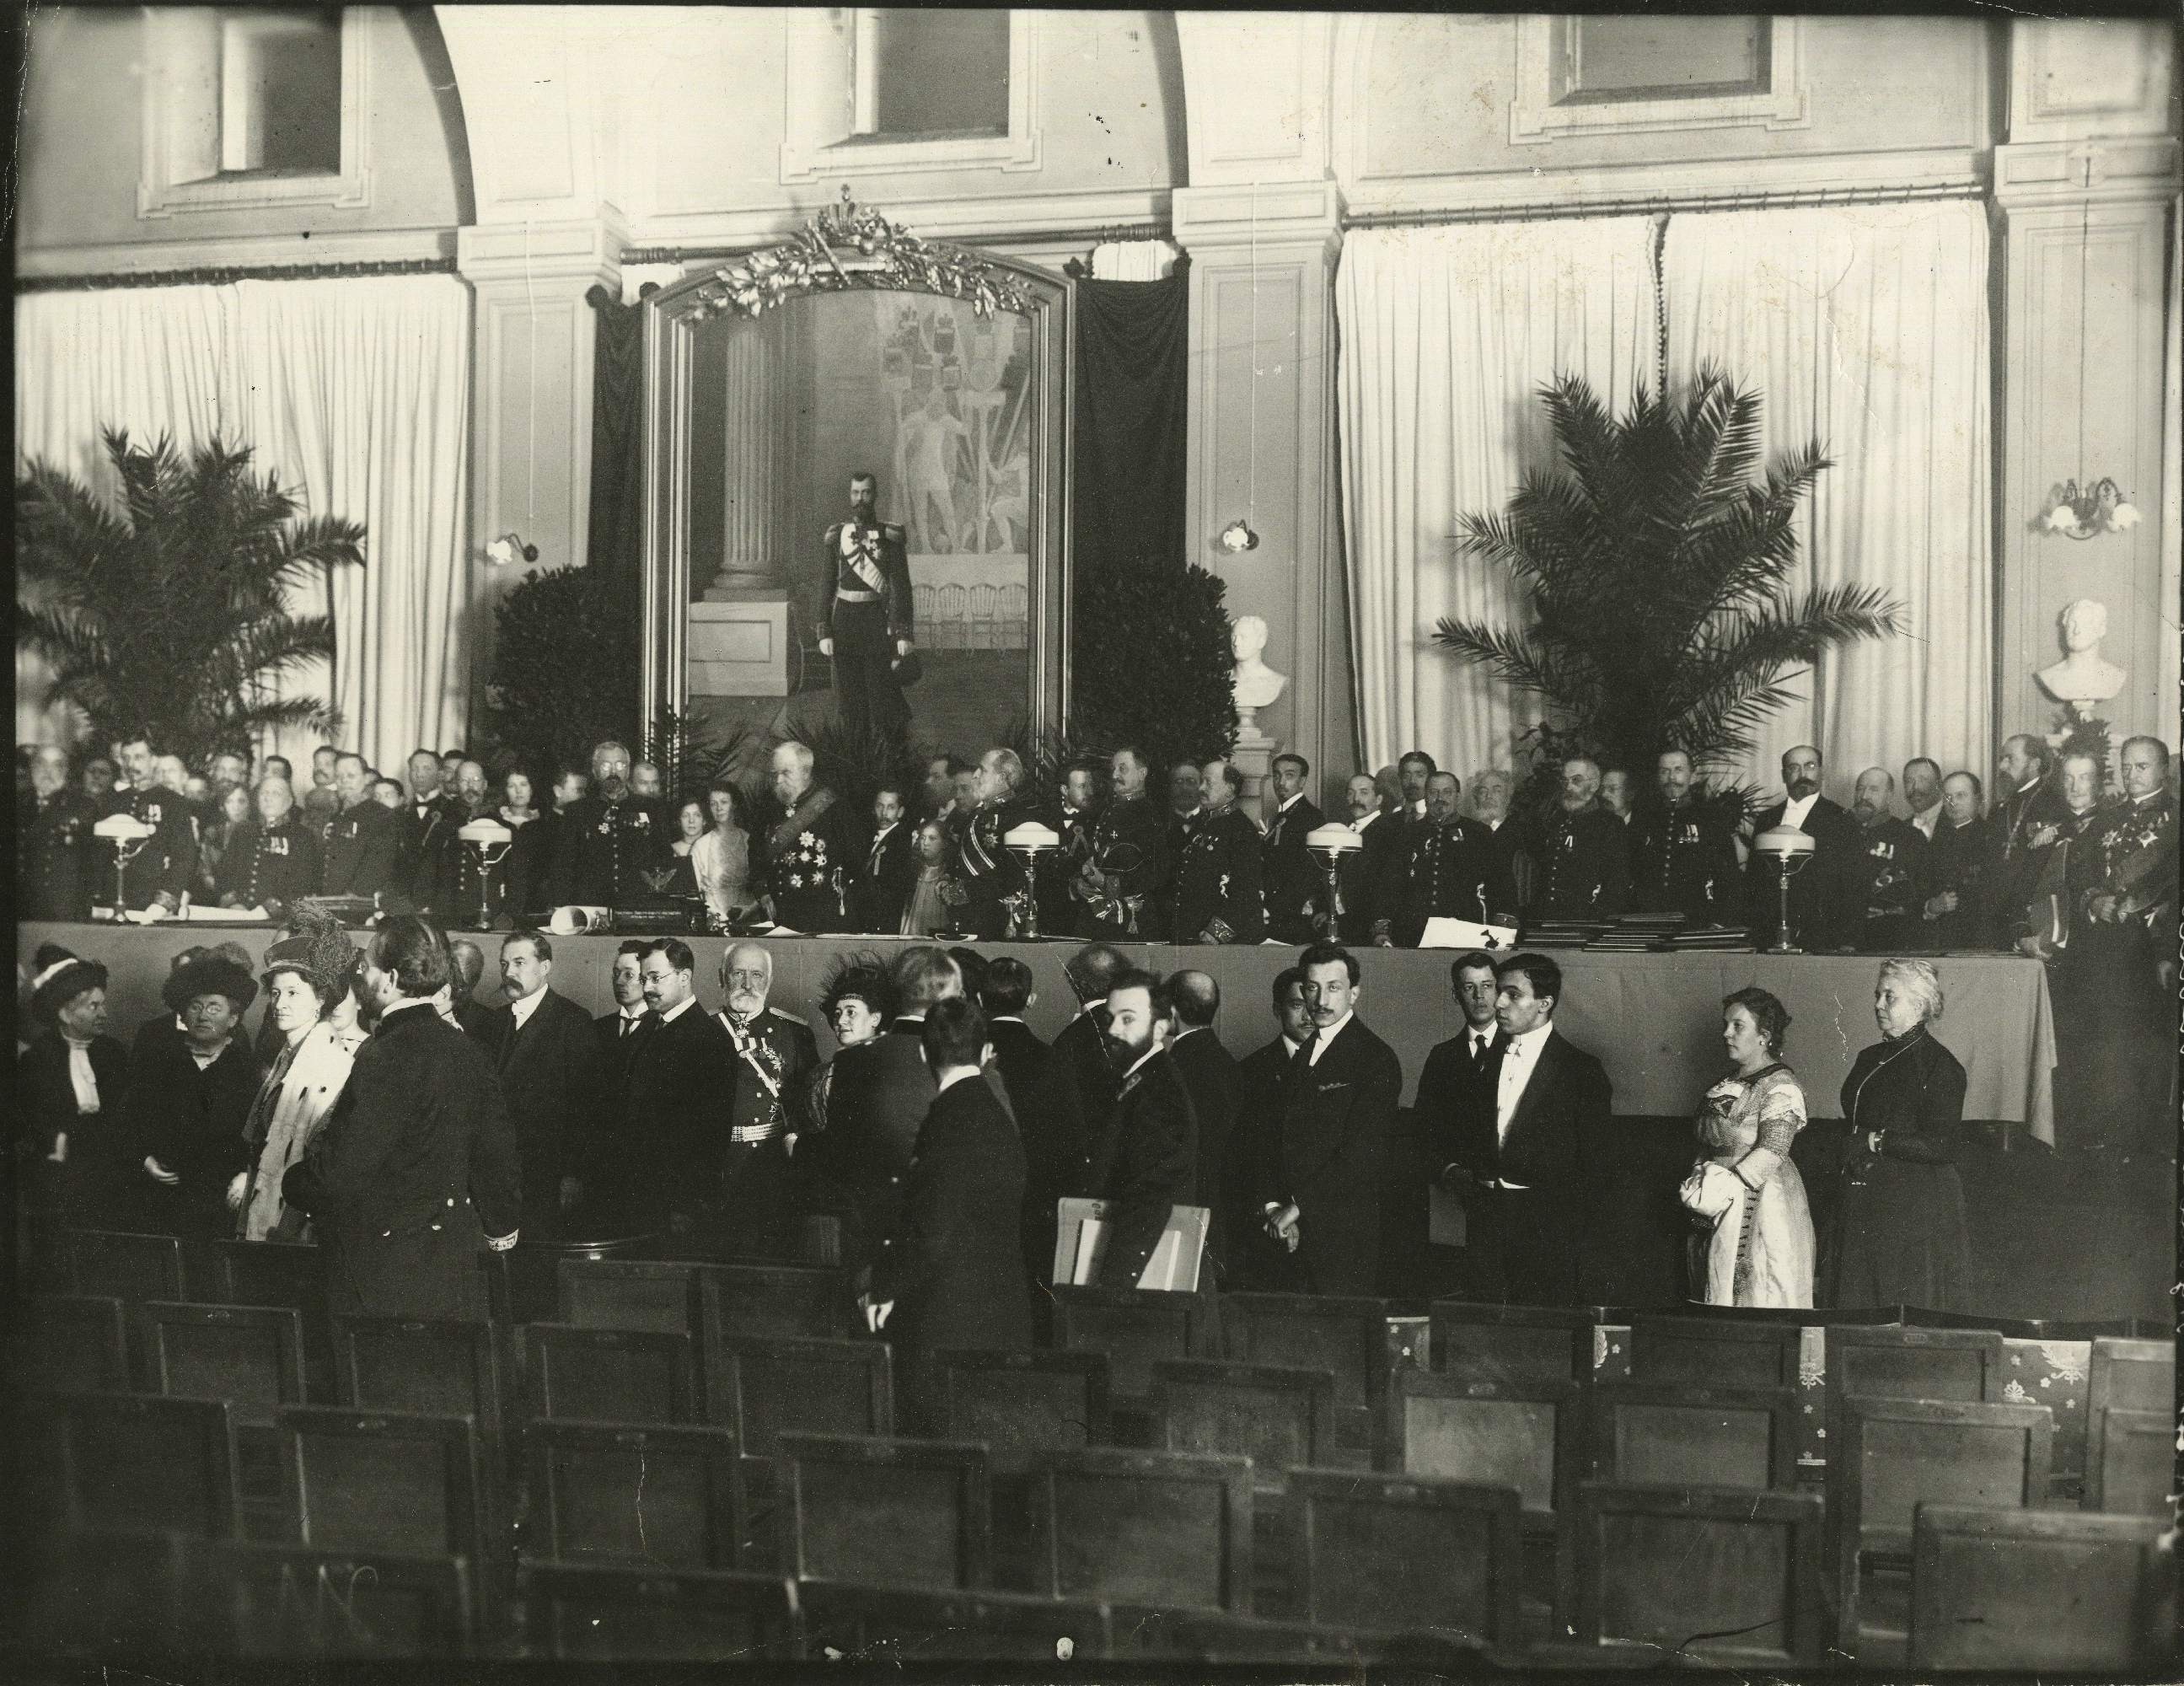 Participants of the Ceremonial Meeting Dedicated to the 100th Anniversary of the IPL. 1914